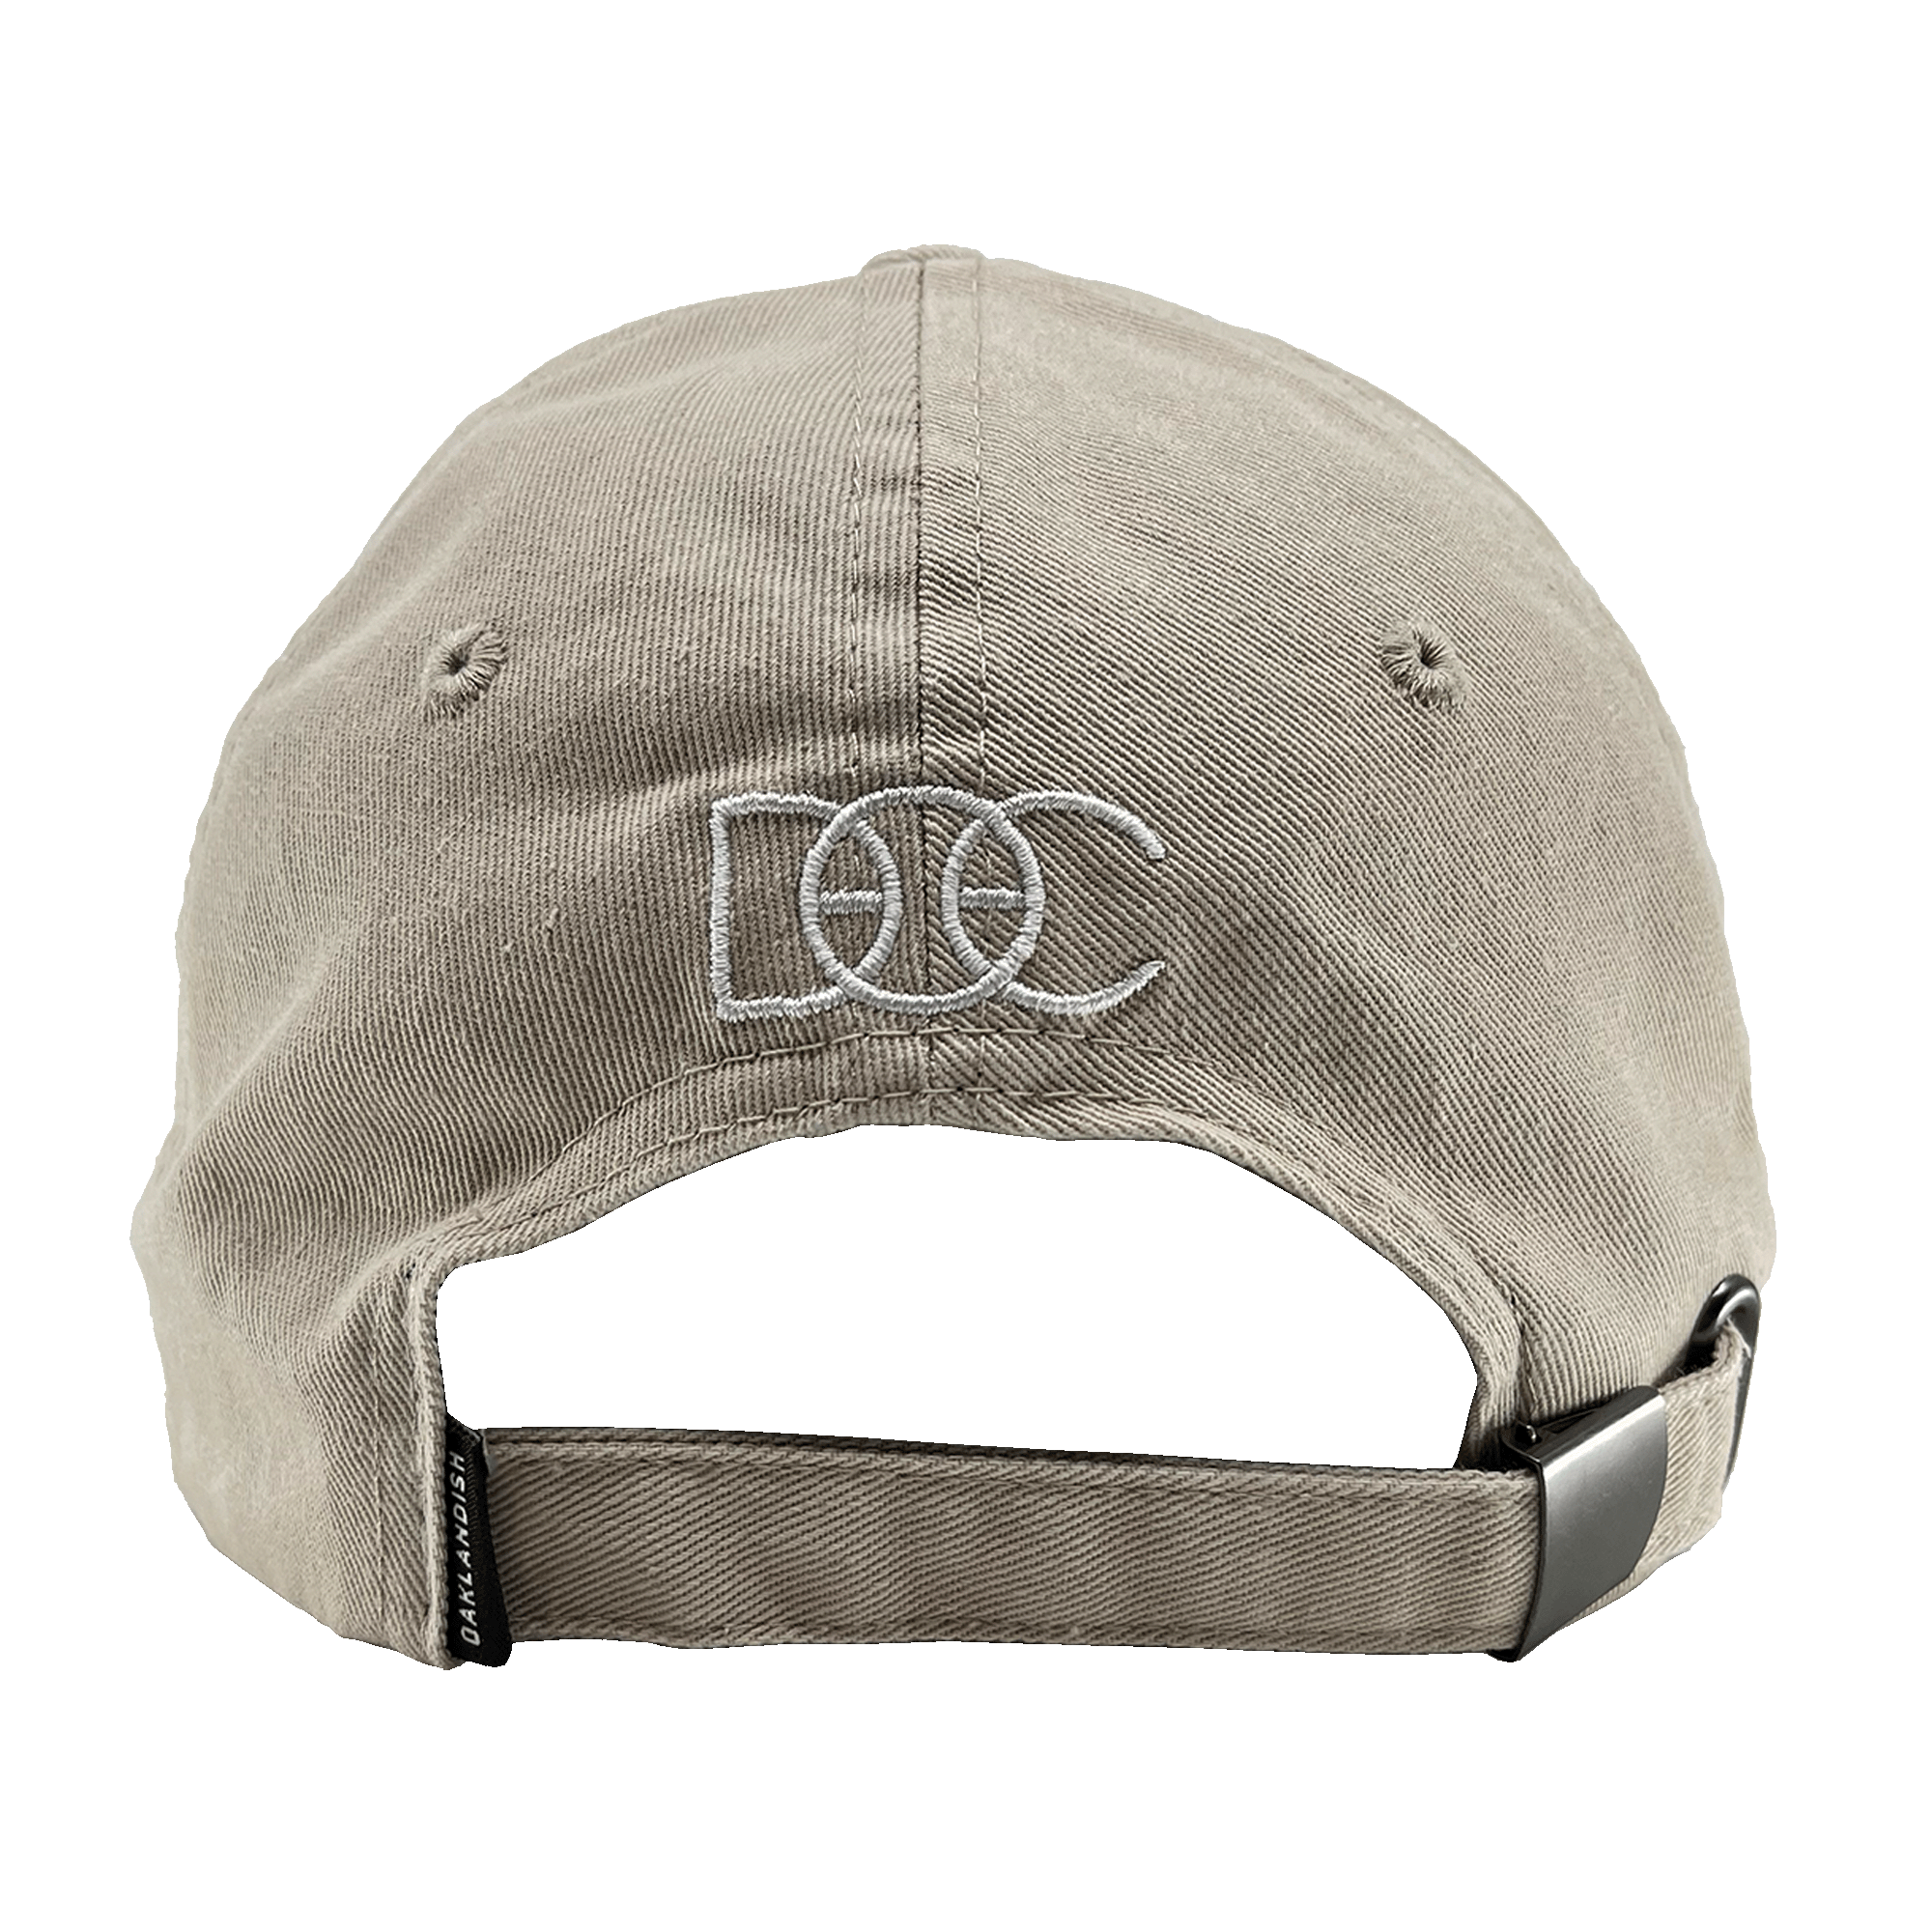 Back view of khaki Oakland Dad Hat designed by Dustin O. Canalin white embroidered DOC wordmark, adjustable strapback, and small Oaklandish wordmark tag.